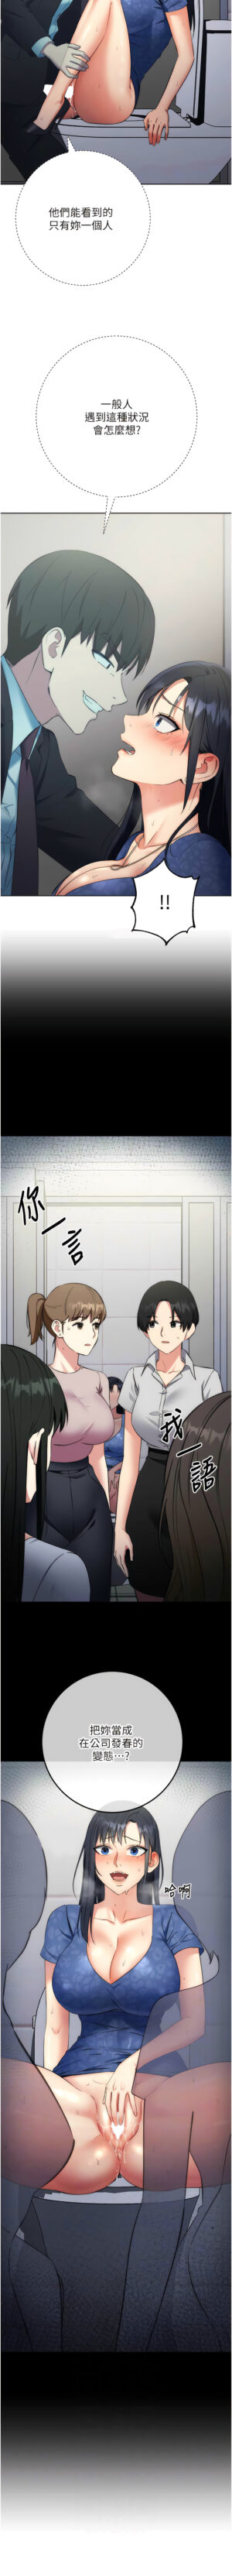 [Jake & Red-A ] 边缘人的复仇 | 邊緣人的復仇 1-10 [Chinese] [Ongoing]